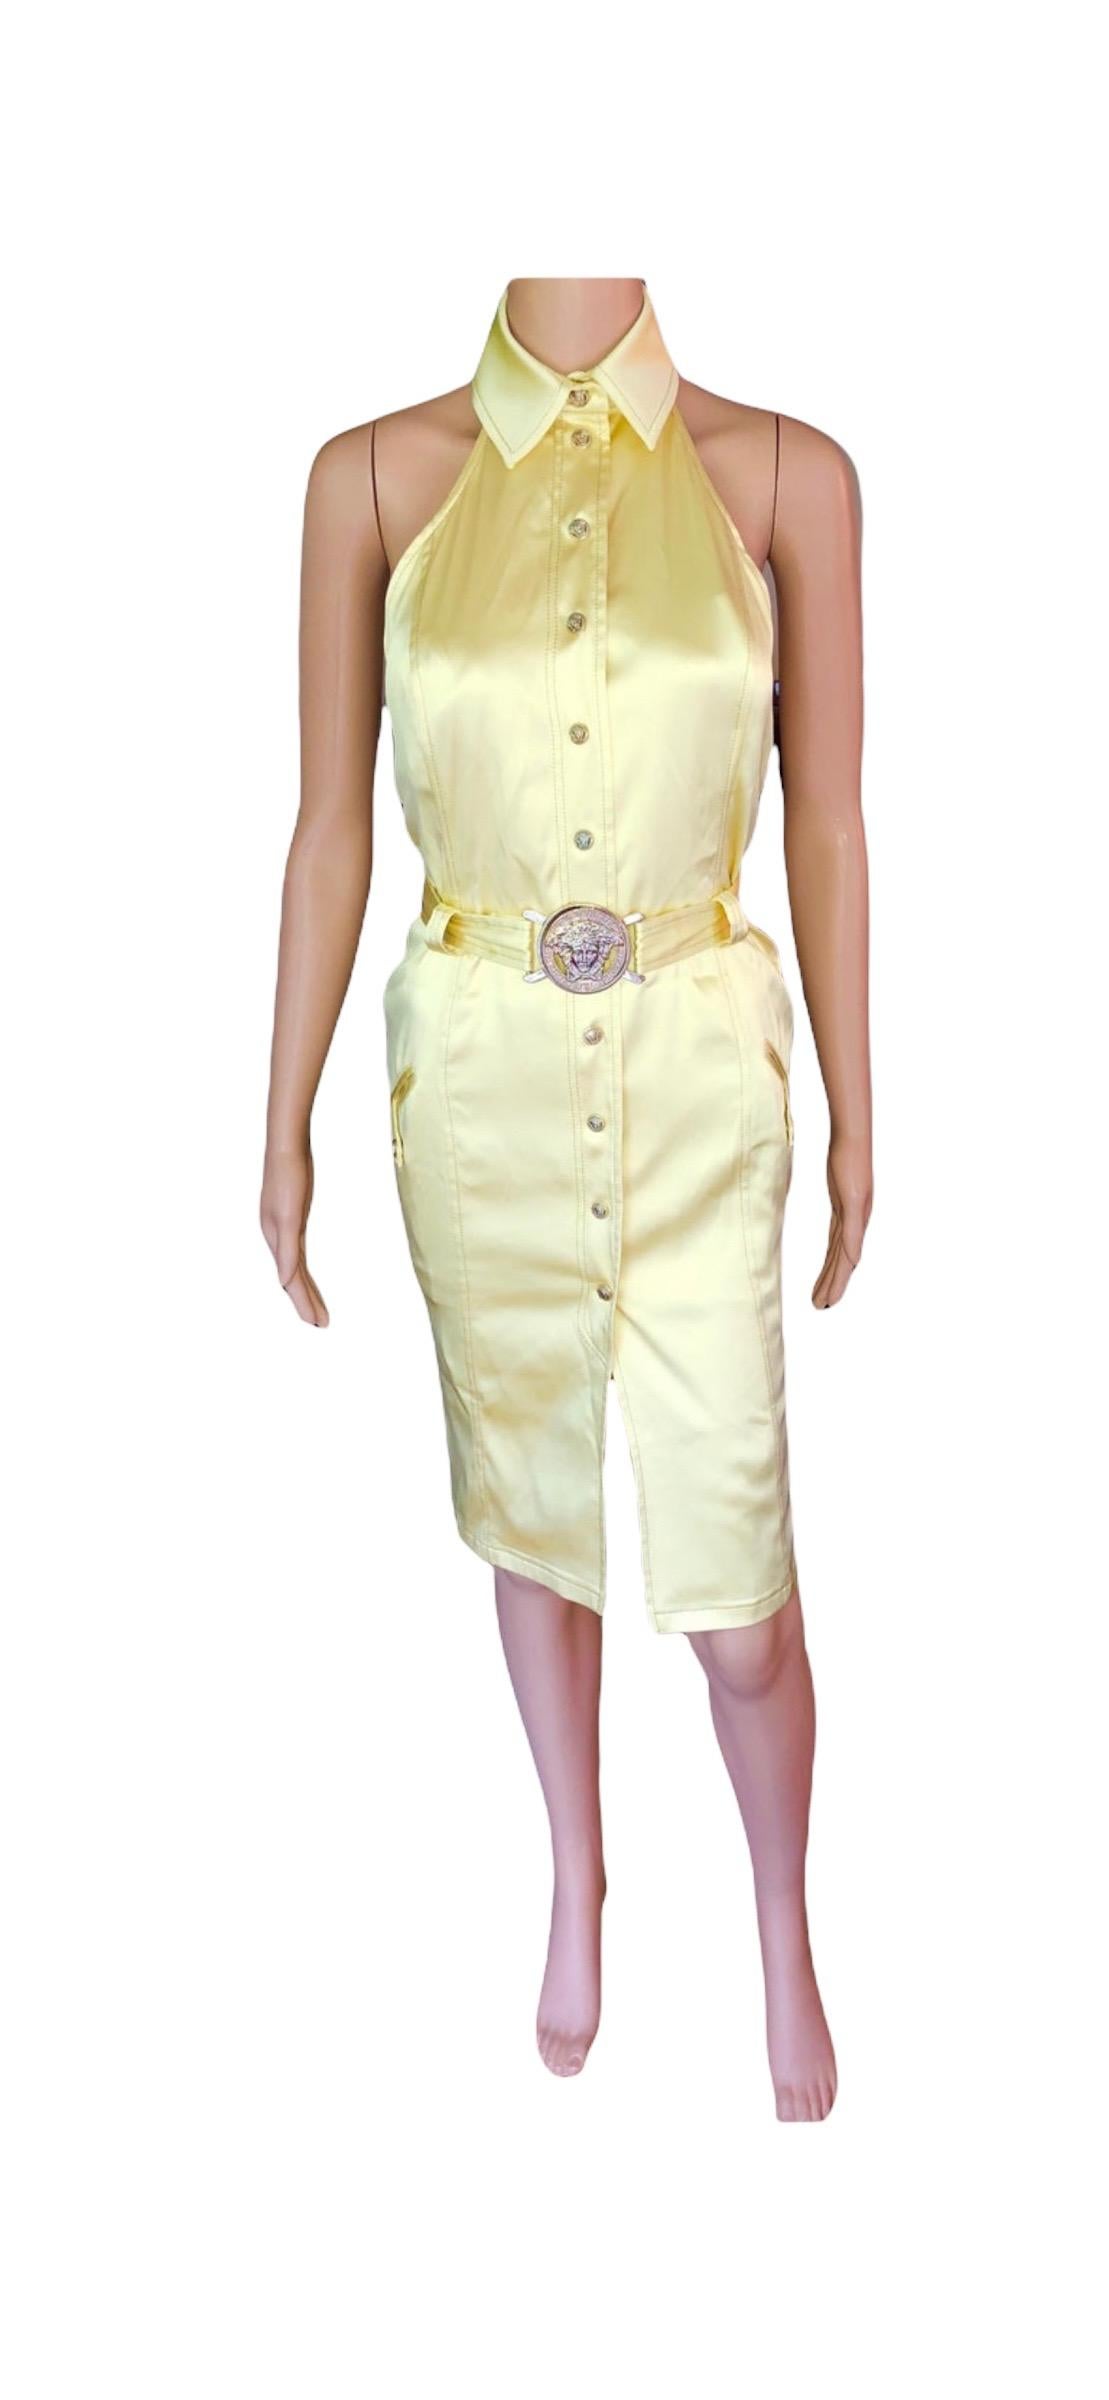 Versace S/S 2005 Runway Logo Belted Cutout Back Dress For Sale 9